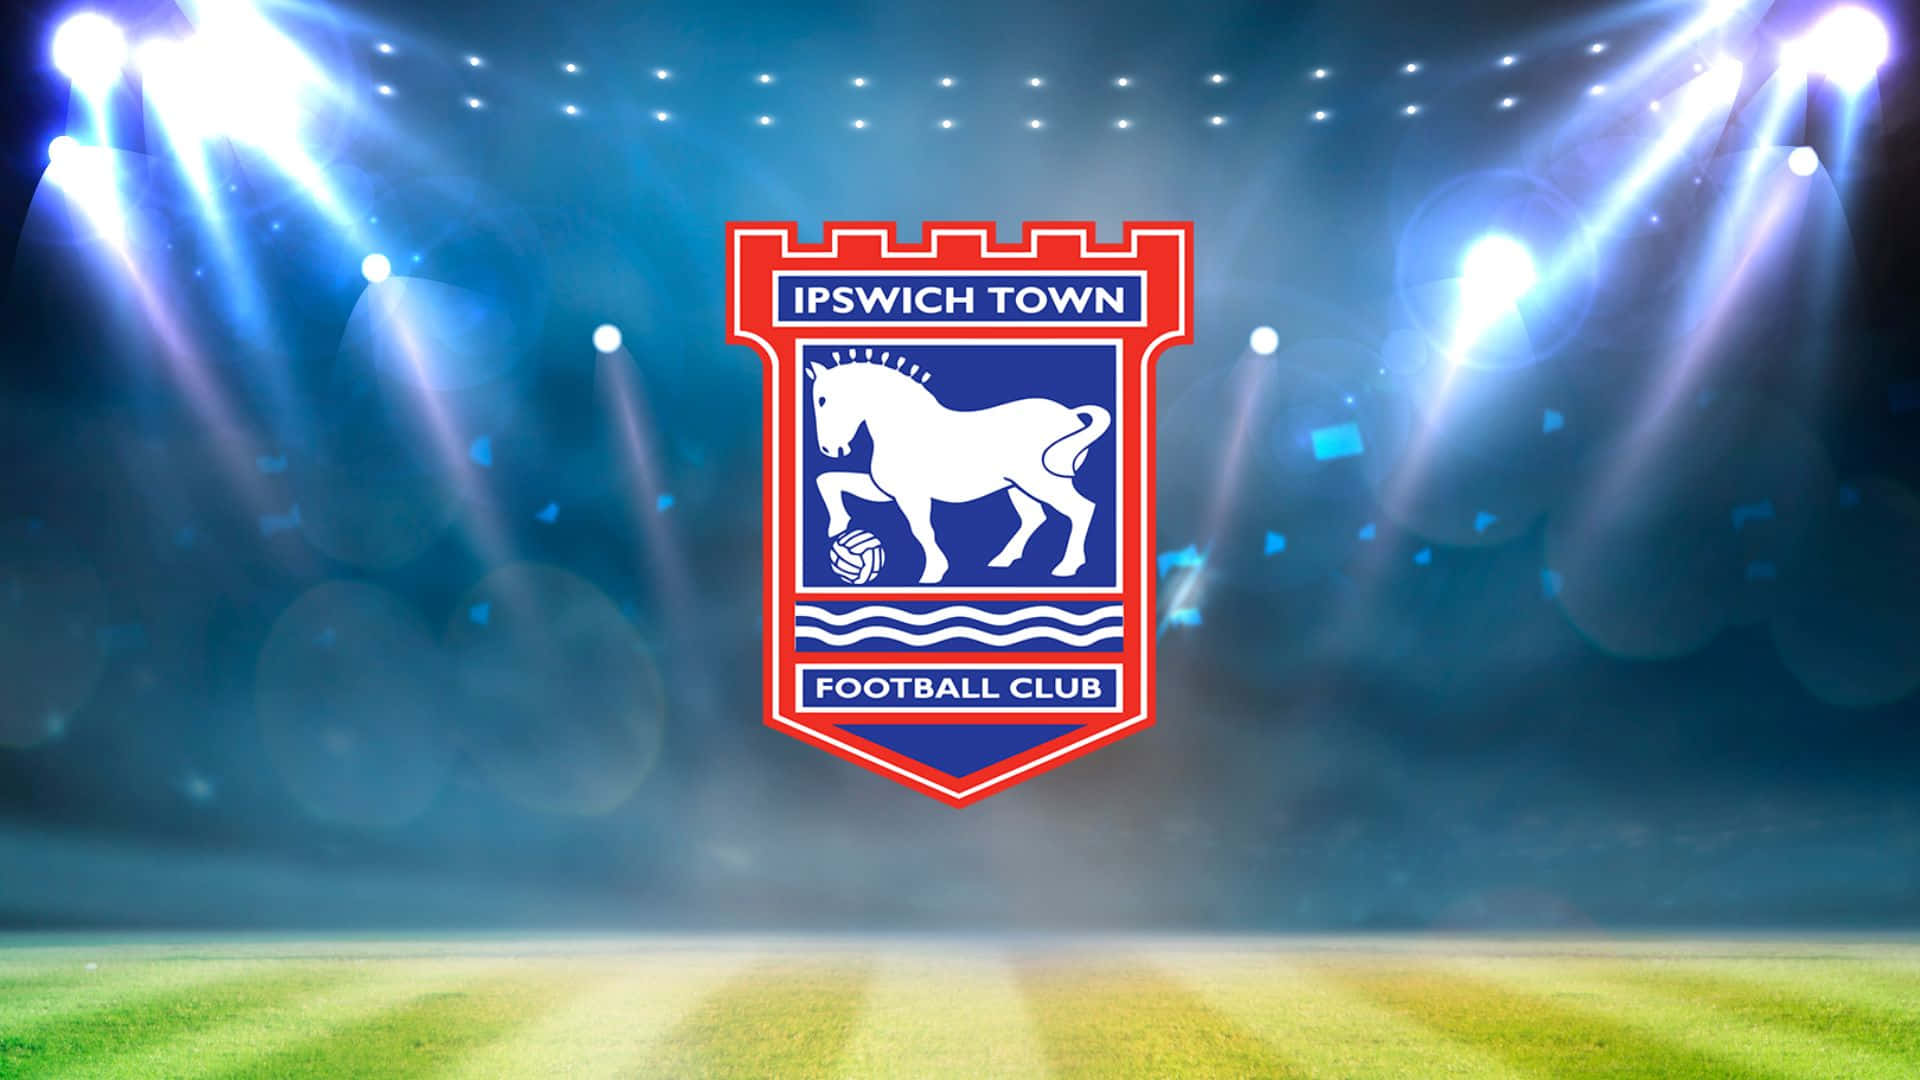 Ipswich Town Football Club Players In Action Wallpaper